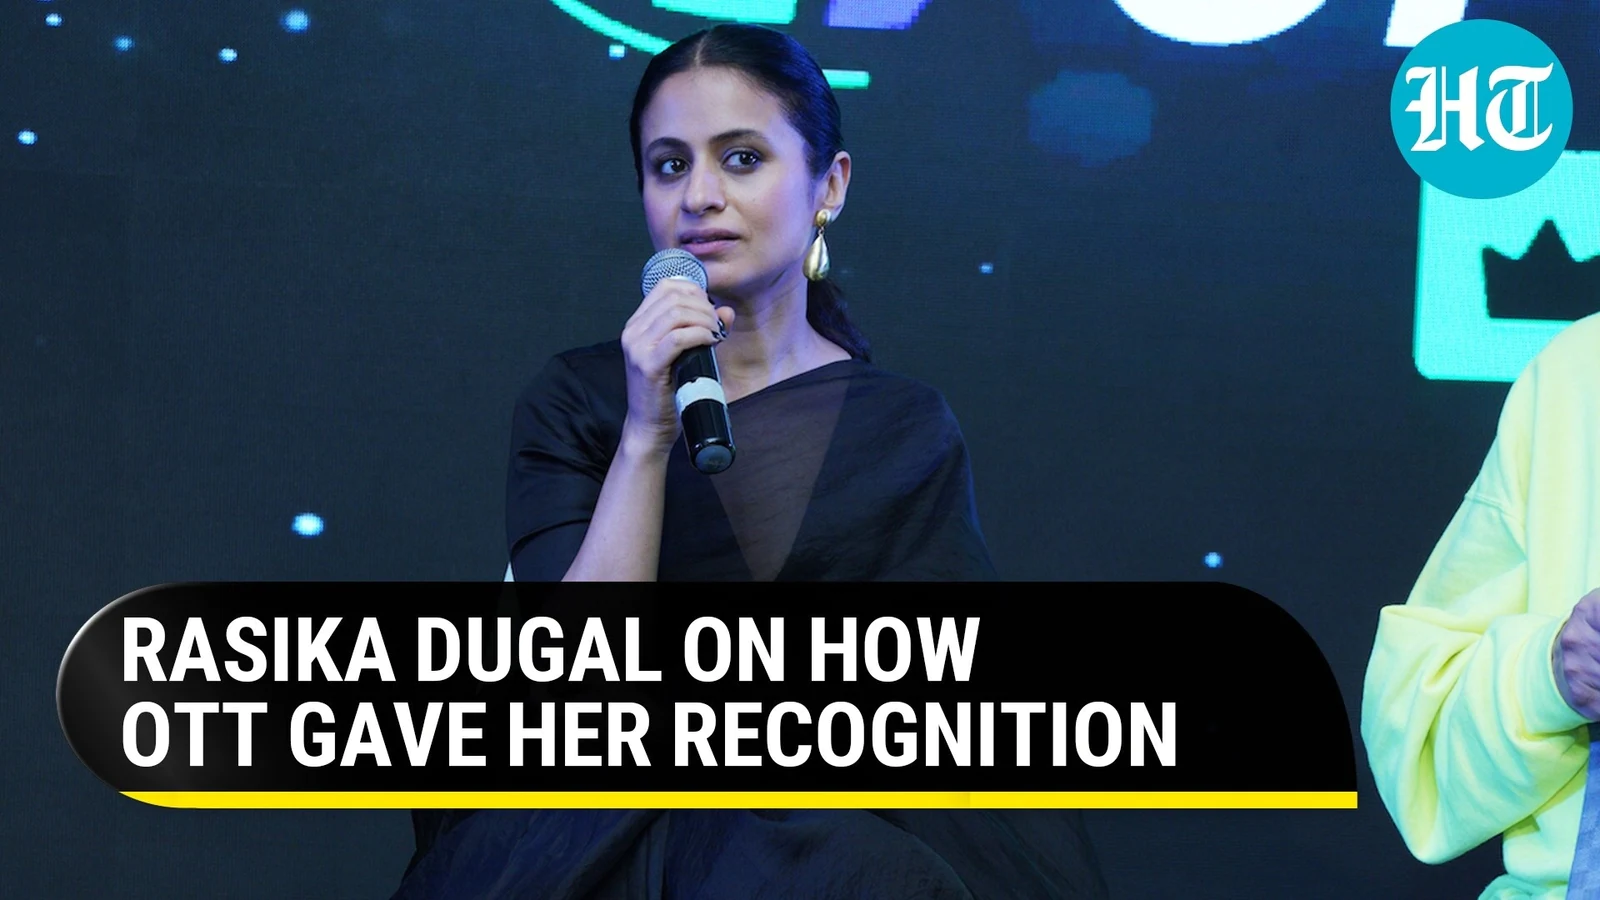 ‘Room for every genre’: Rasika Dugal on how OTT gives recognition to her work